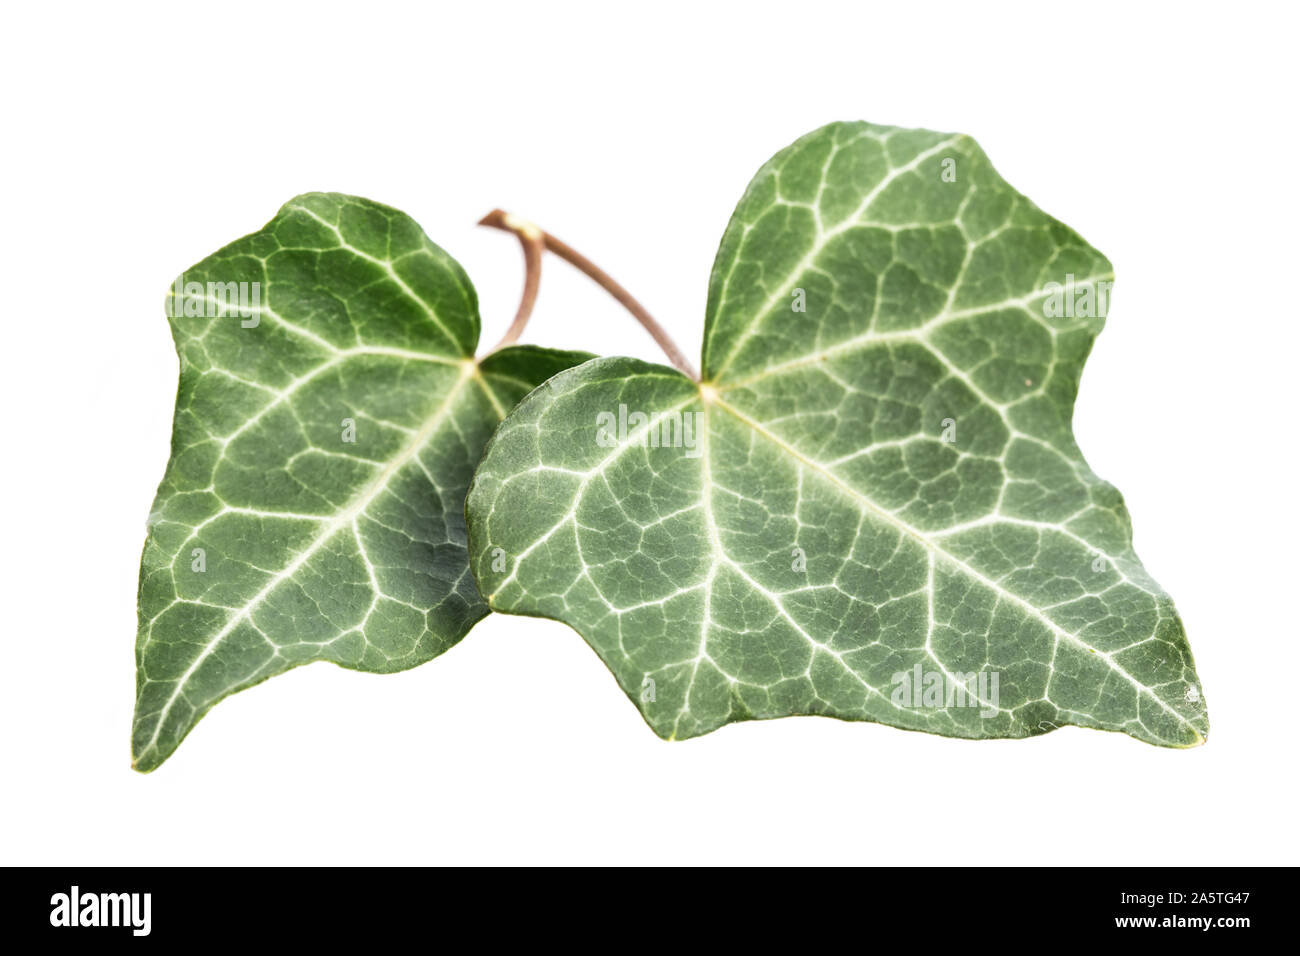 healing plant studies: Ivy (Hedera helix) Two younger leaves isolated on white background Stock Photo